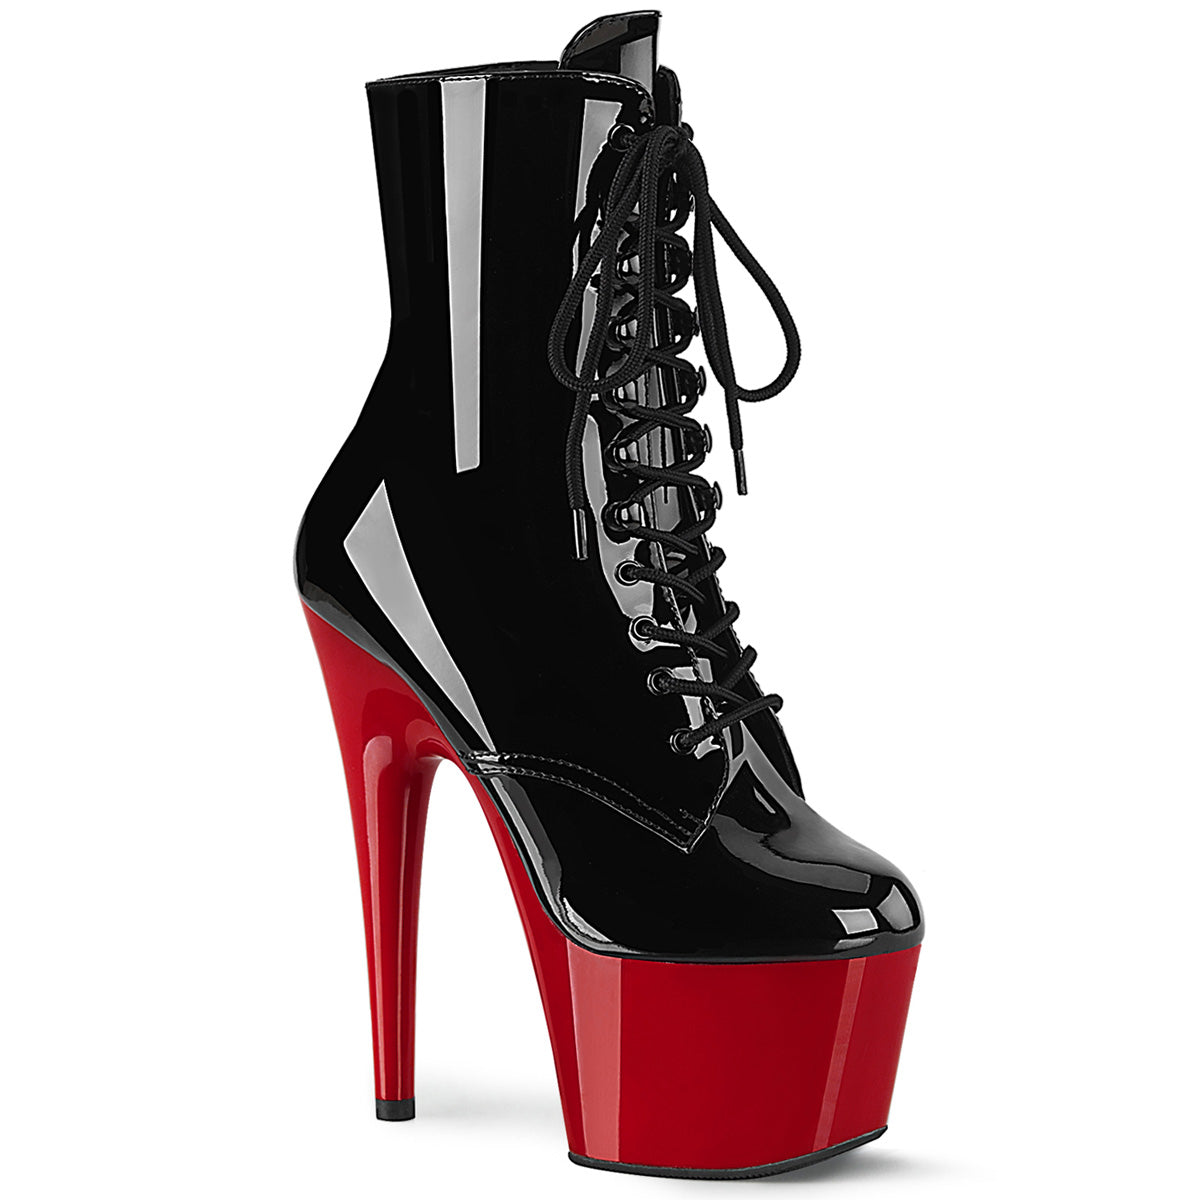 ADORE-1020 7" Heel Black Patent Red Exotic Dance Ankle Boots